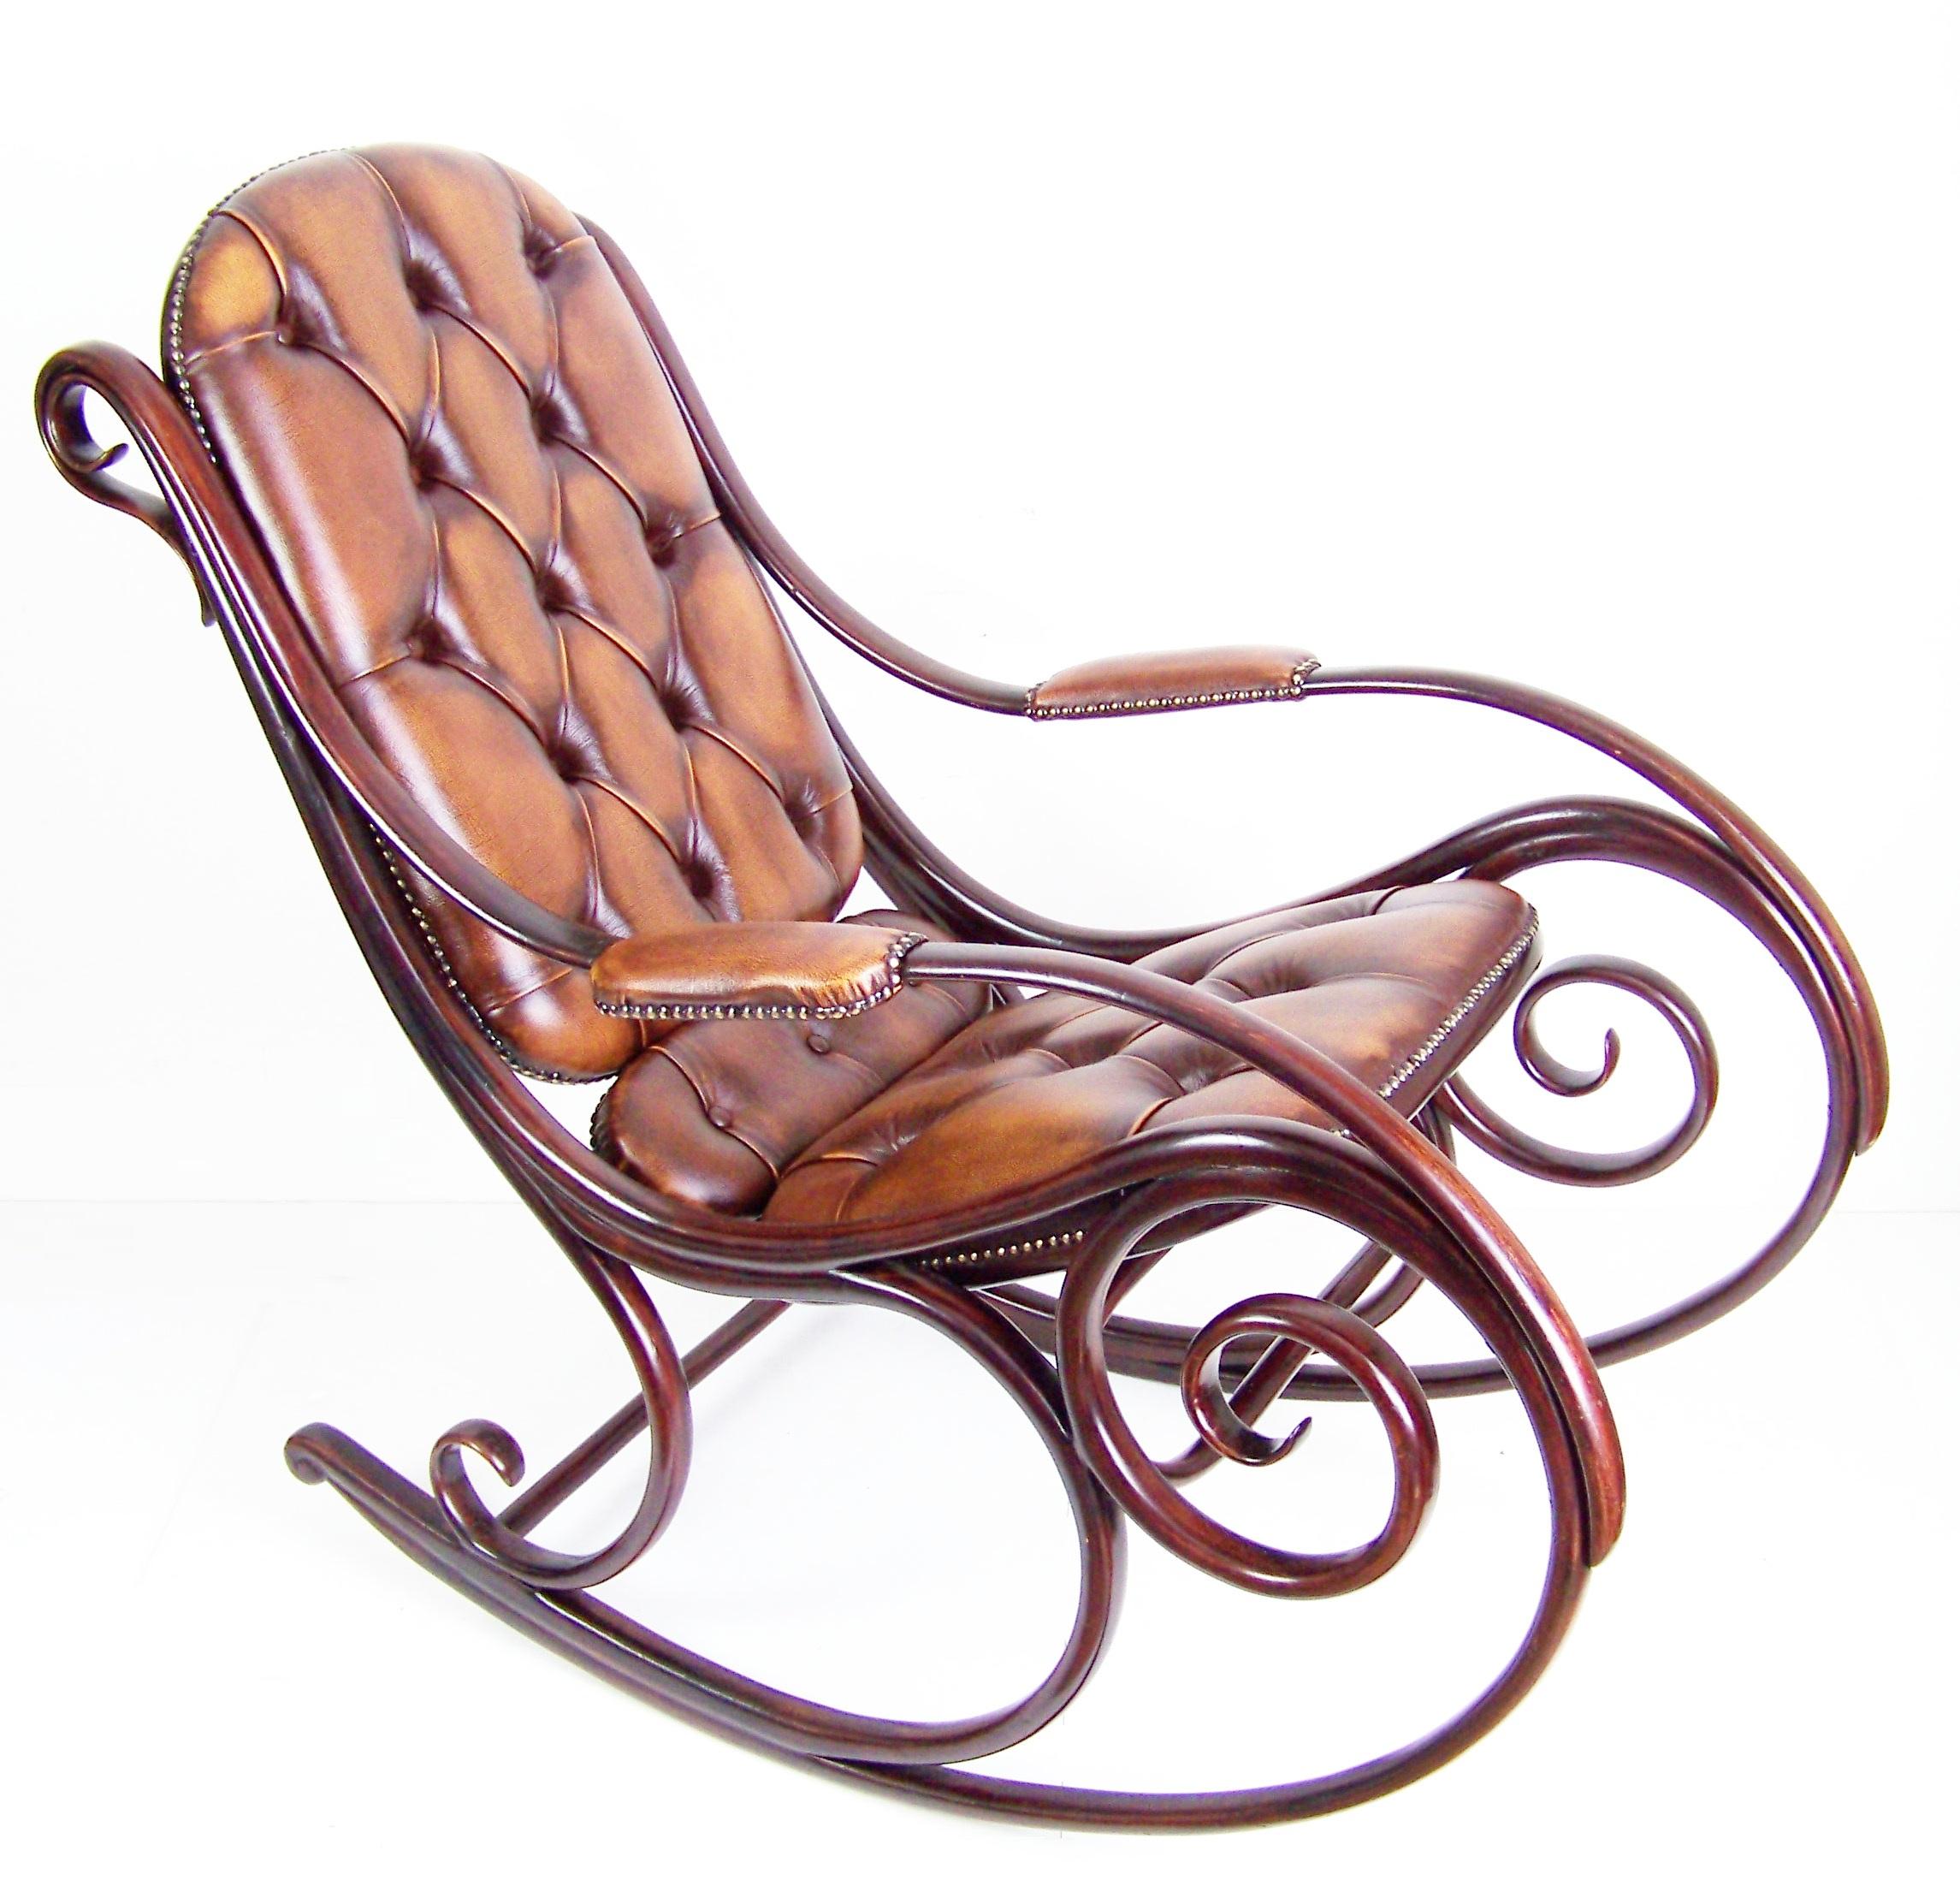 Very rare model, the first rocking chair, which was by Michael Thonet invented. Depending on the form and used stamp, this is a very rare archaic model. The armchair was made for upholstery. It was in that time more luxurious, than with a regular